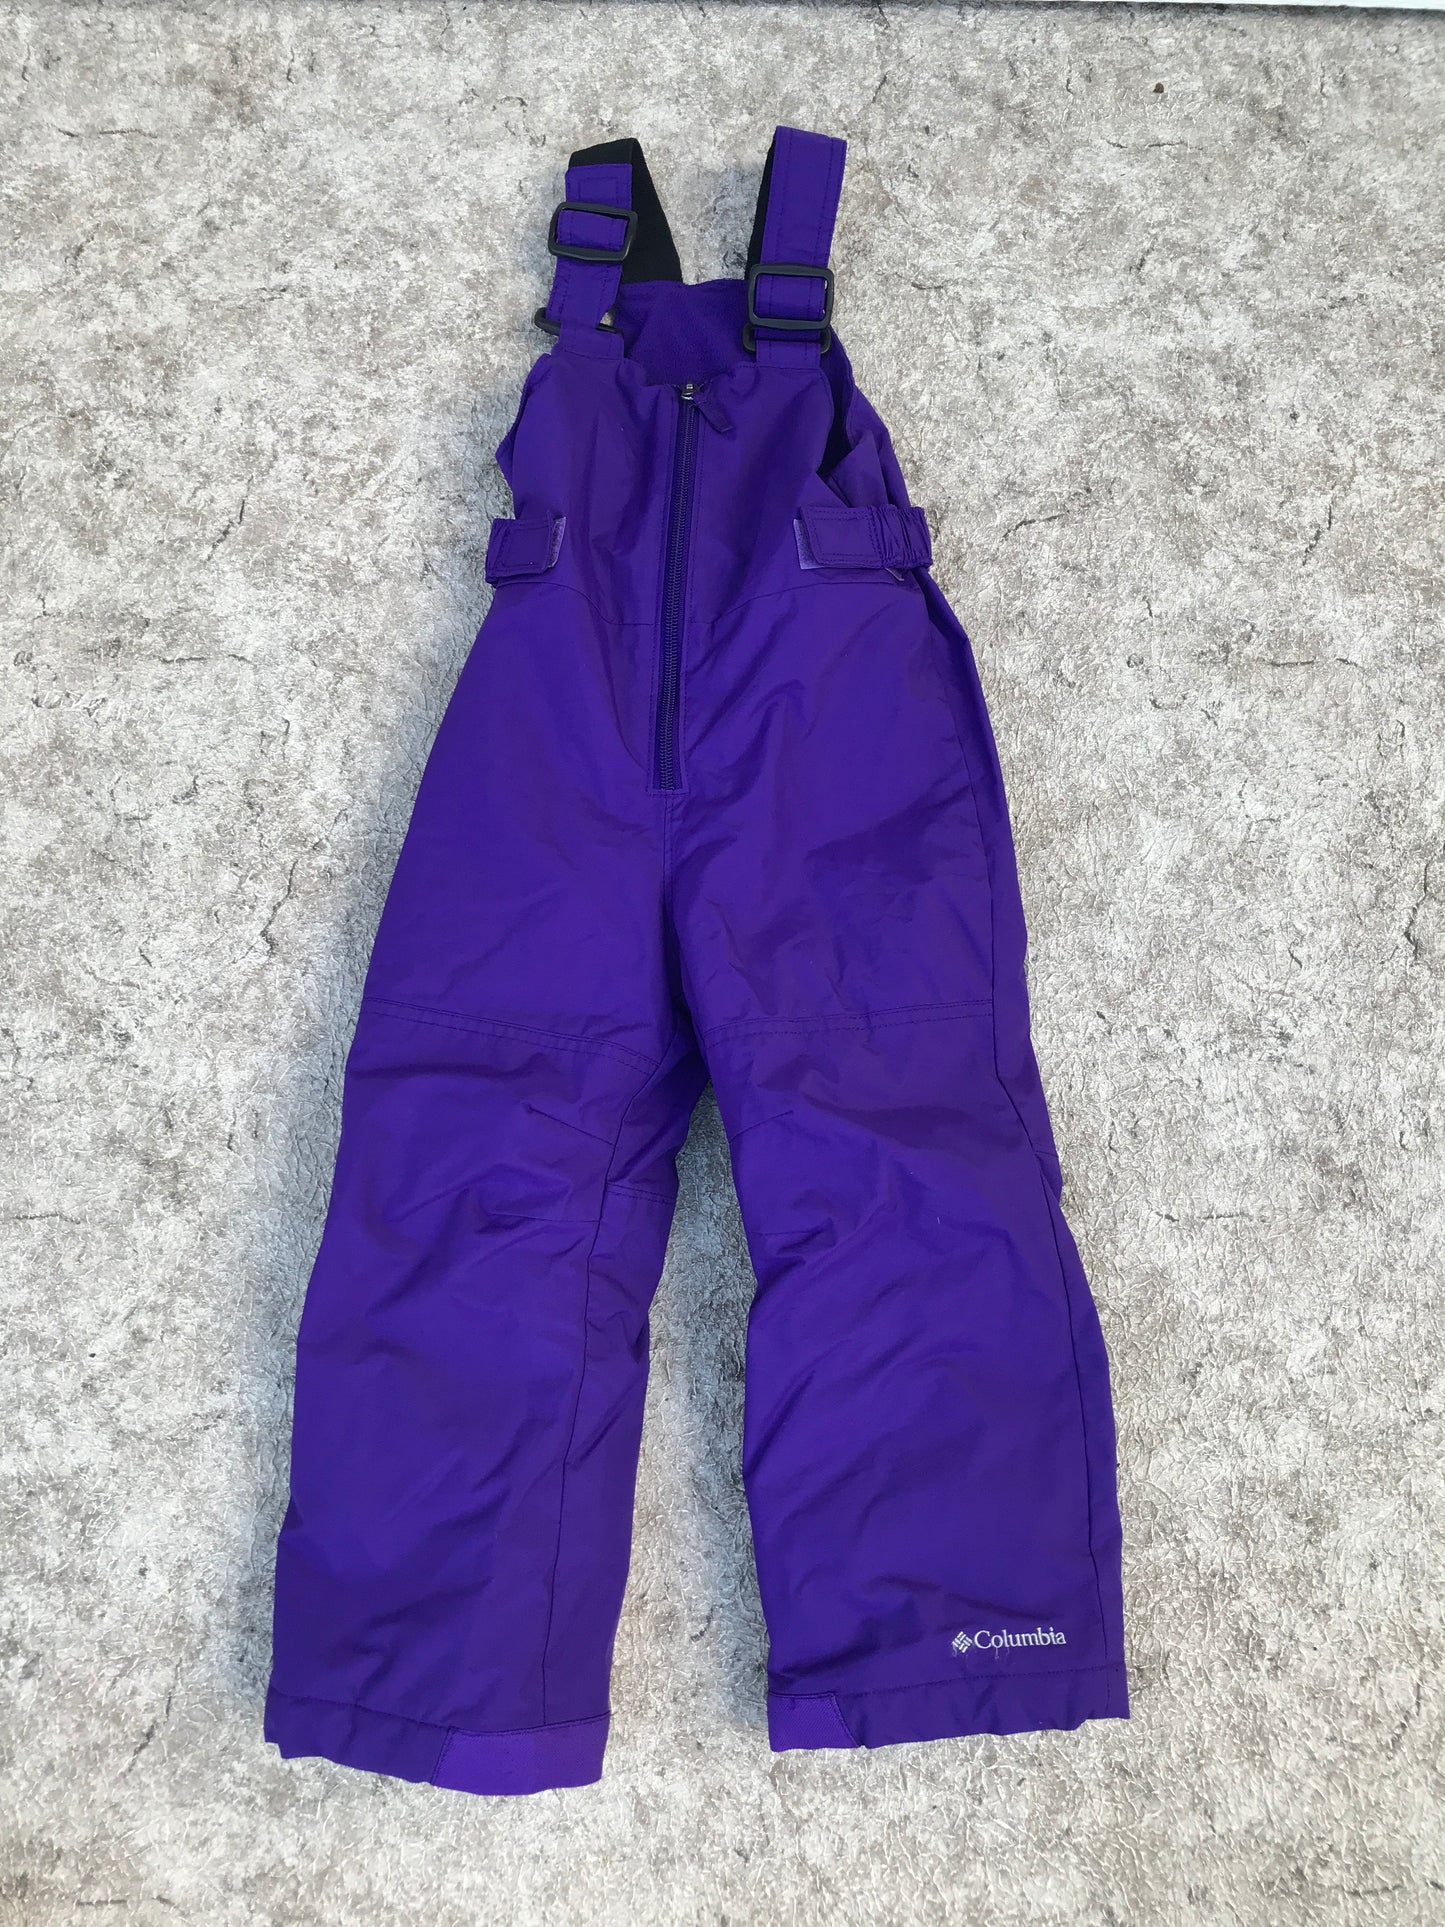 Snow Pants Child Size 4 Columbia Purple With Bib Outstanding Quality Like New is